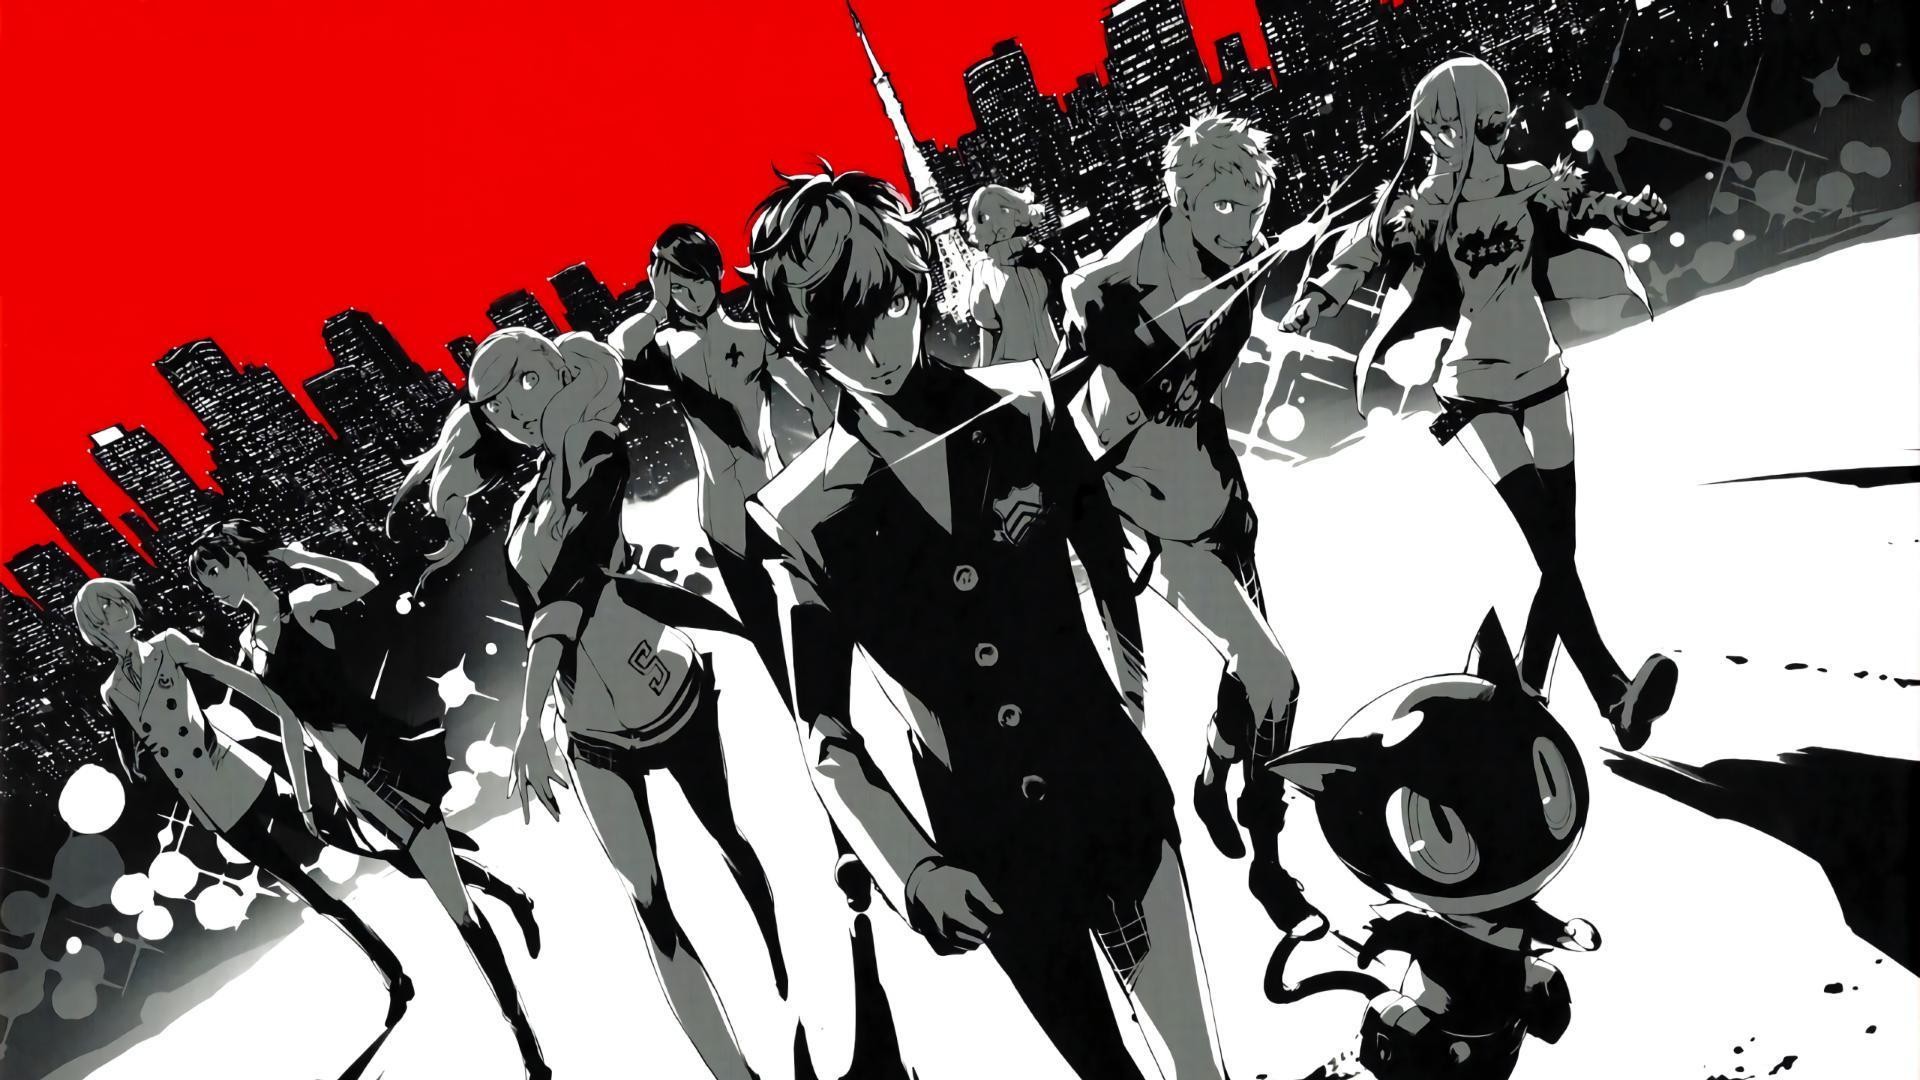 1920x1080 w/ - Persona 5 Wallpapers - Anime/Wallpapers - 4chan